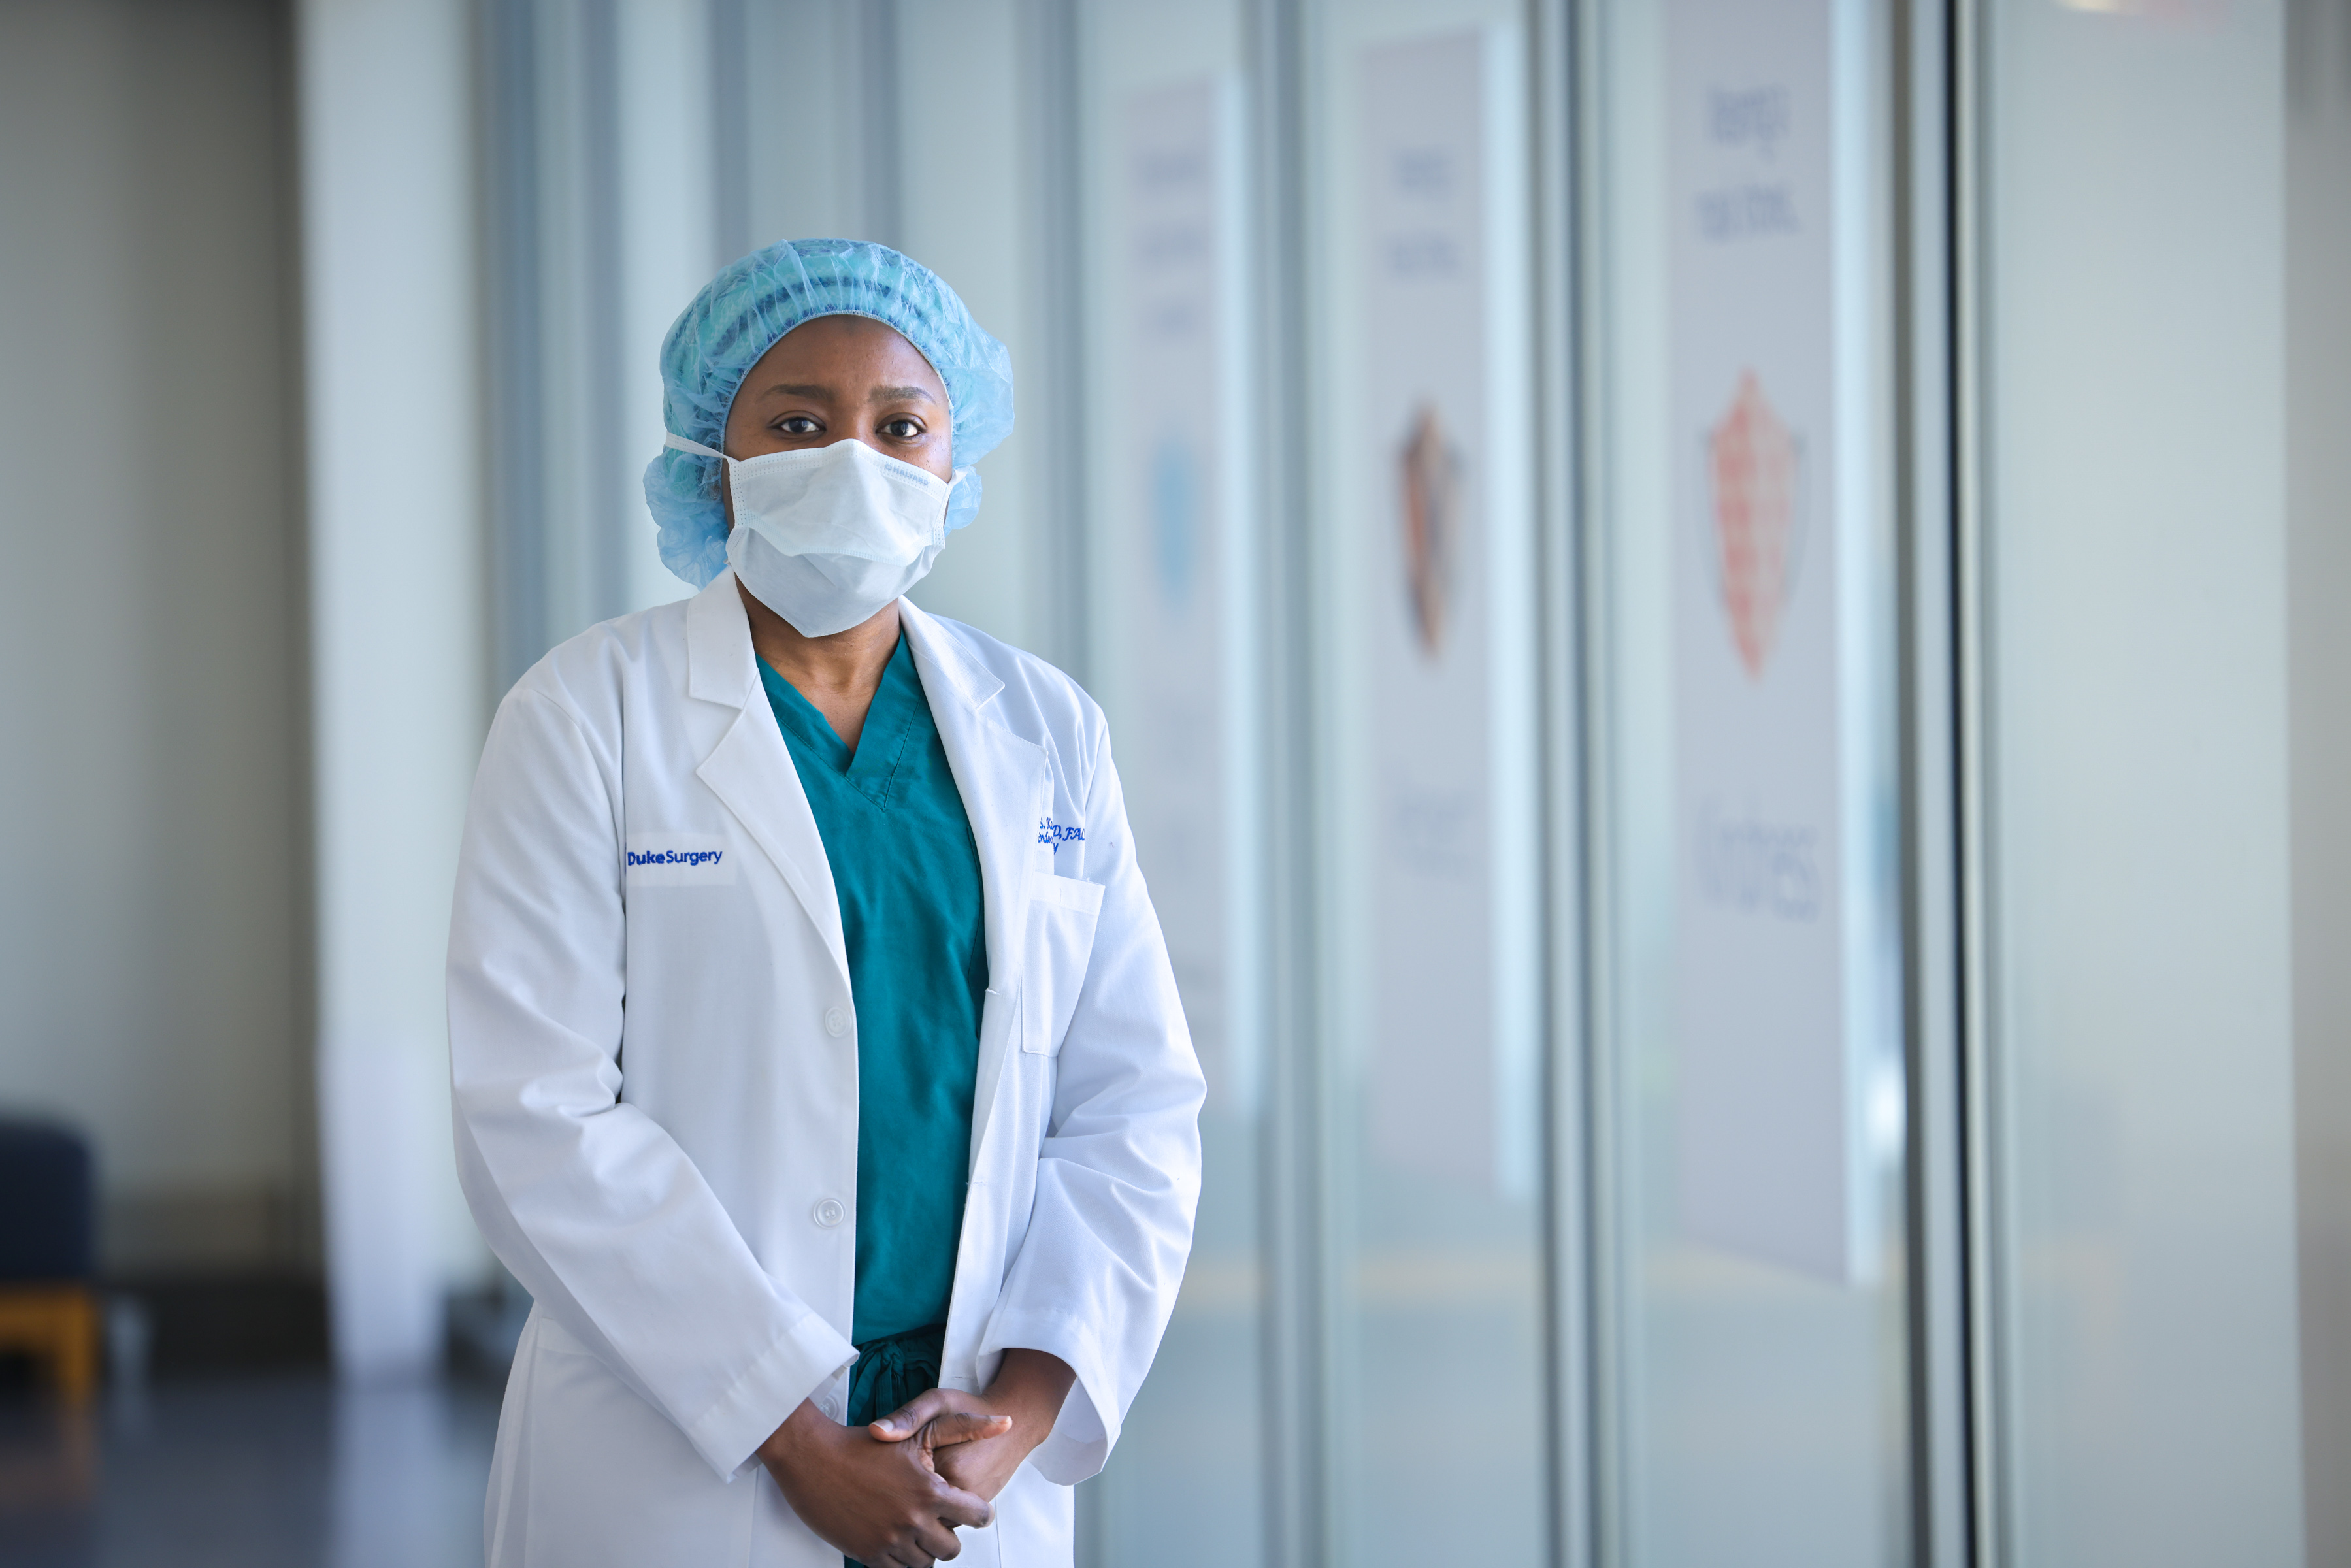 Dr. Hadiza Kazaure stands next to windows in Duke University Hospital after performing surgery